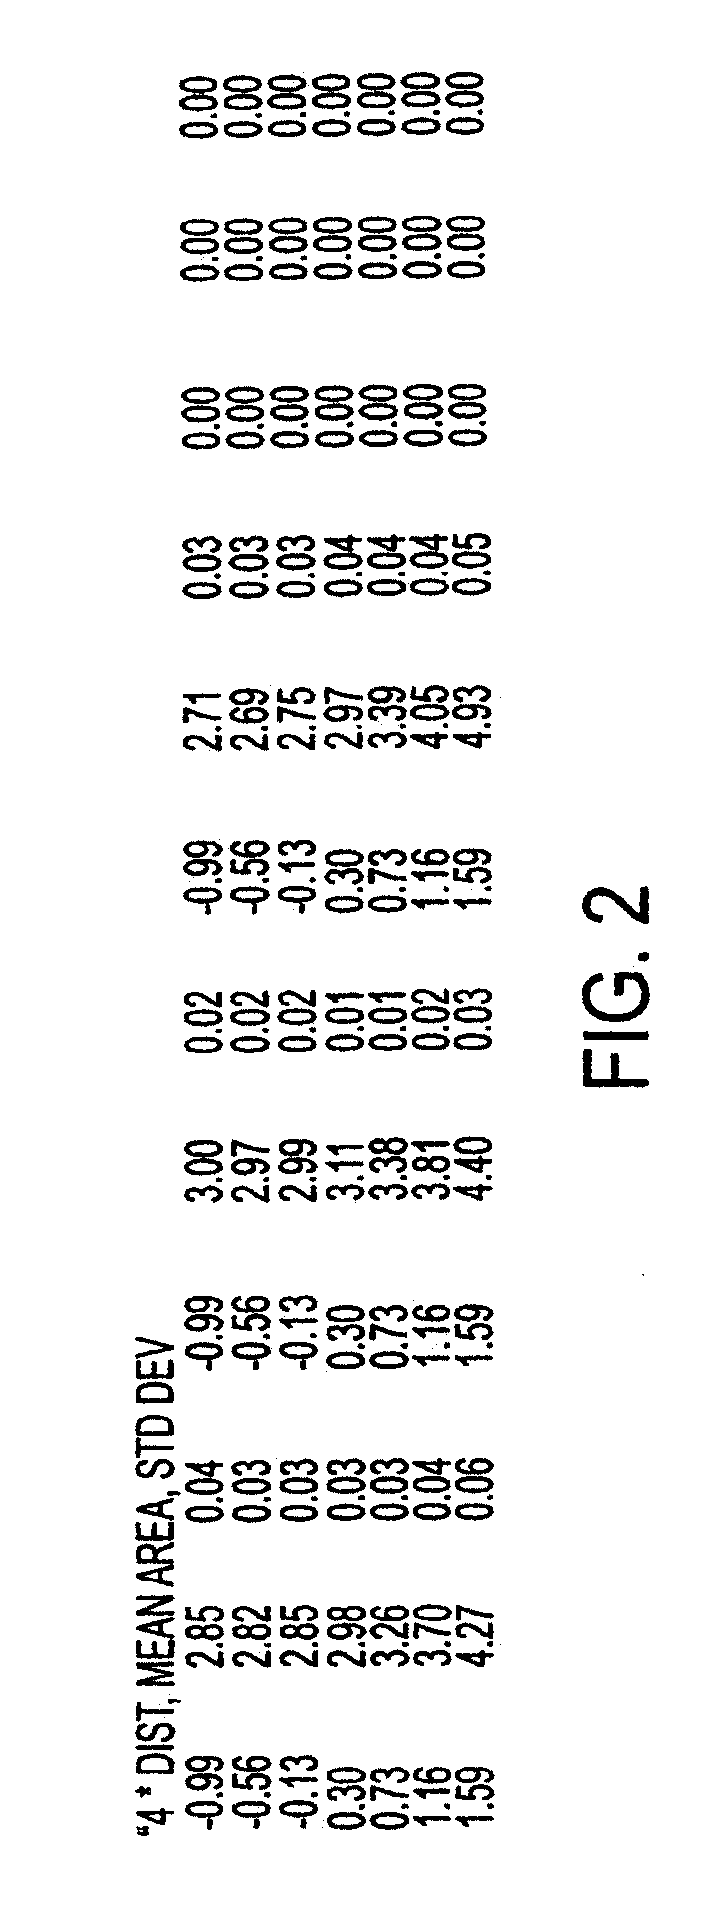 System and Method for Three-Dimensional Airway Reconstruction, Assessment and Analysis